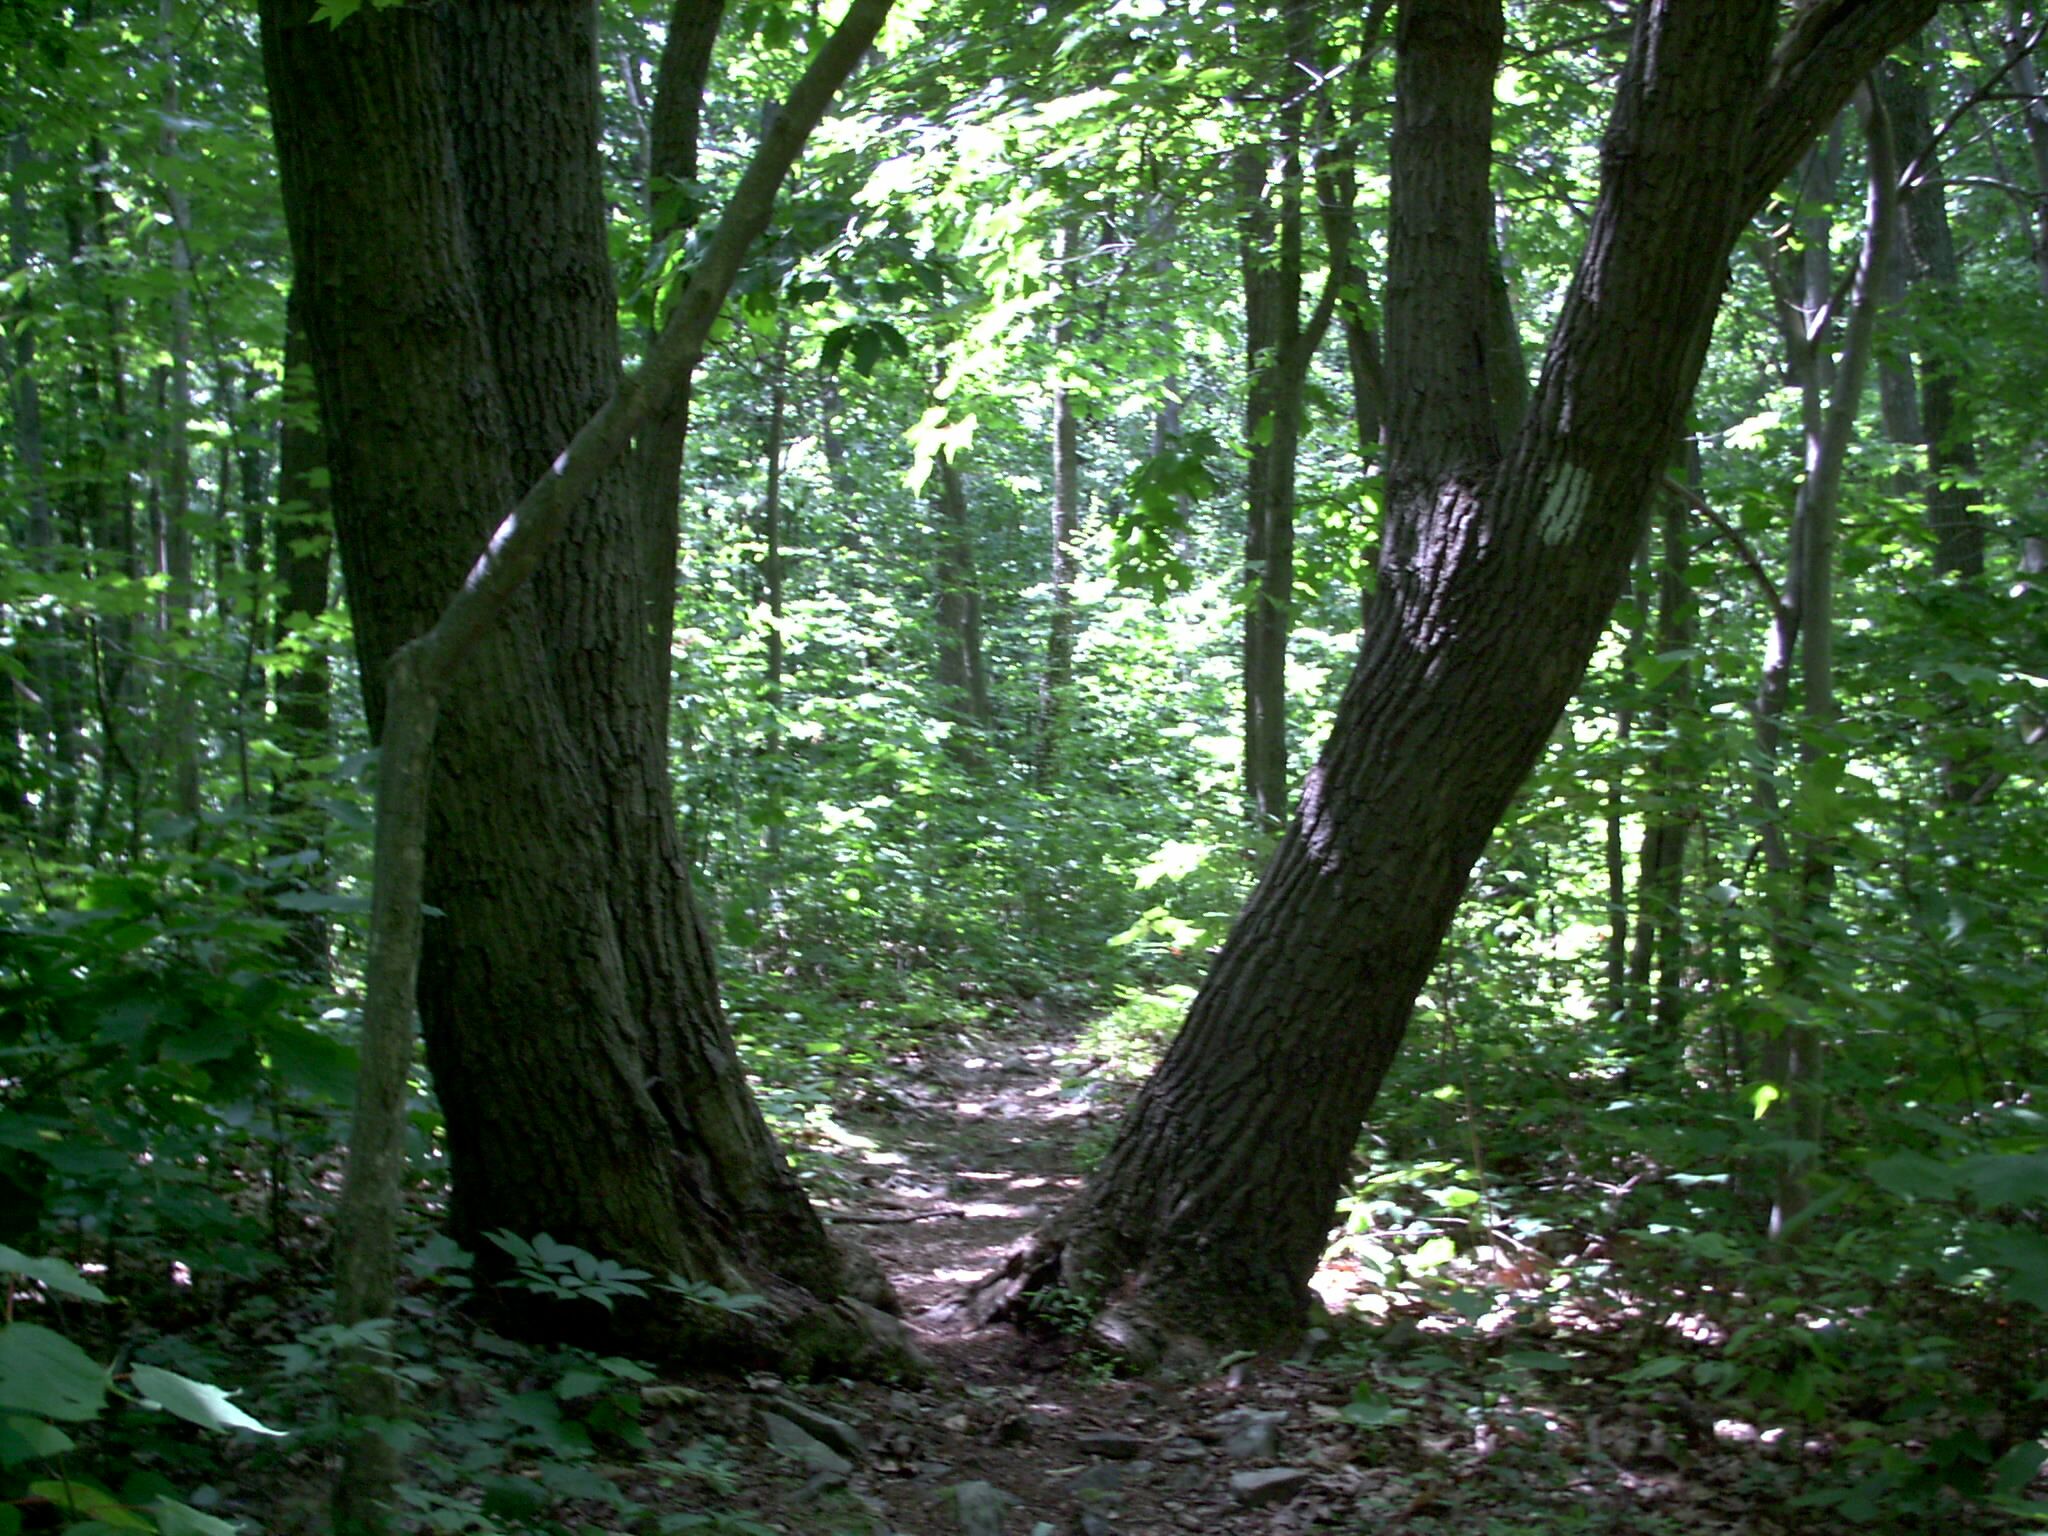 Tree-gate on the trail, south of William Penn shelter.  Courtesy stewartriley@earthlink.net